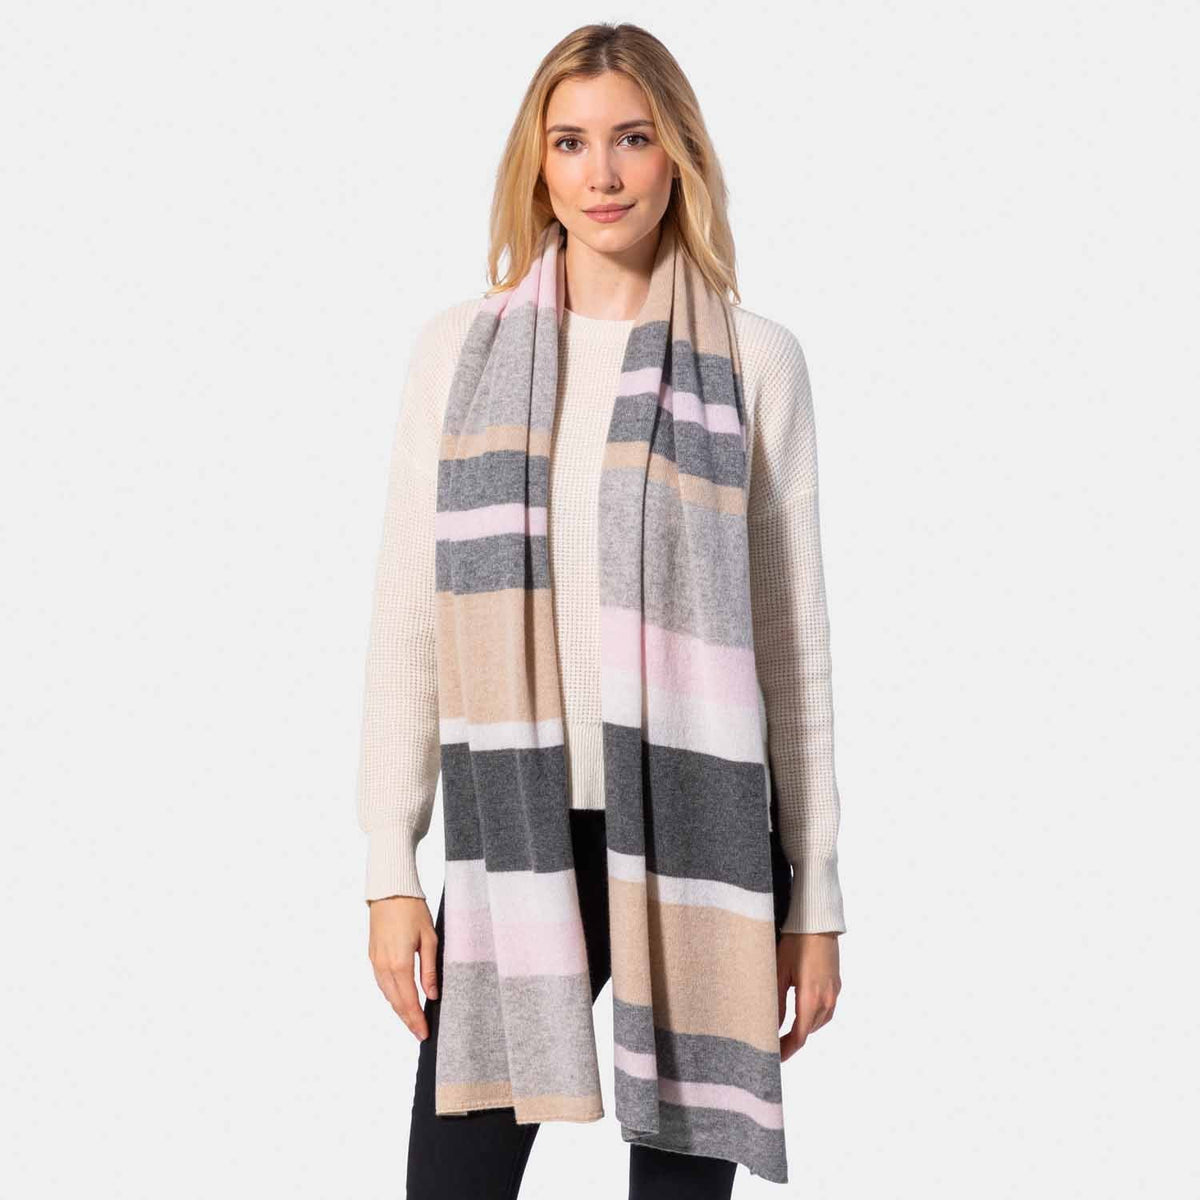 Picture of a woman in a colorblock knit travel wrap with camel, grey, cream and pink.